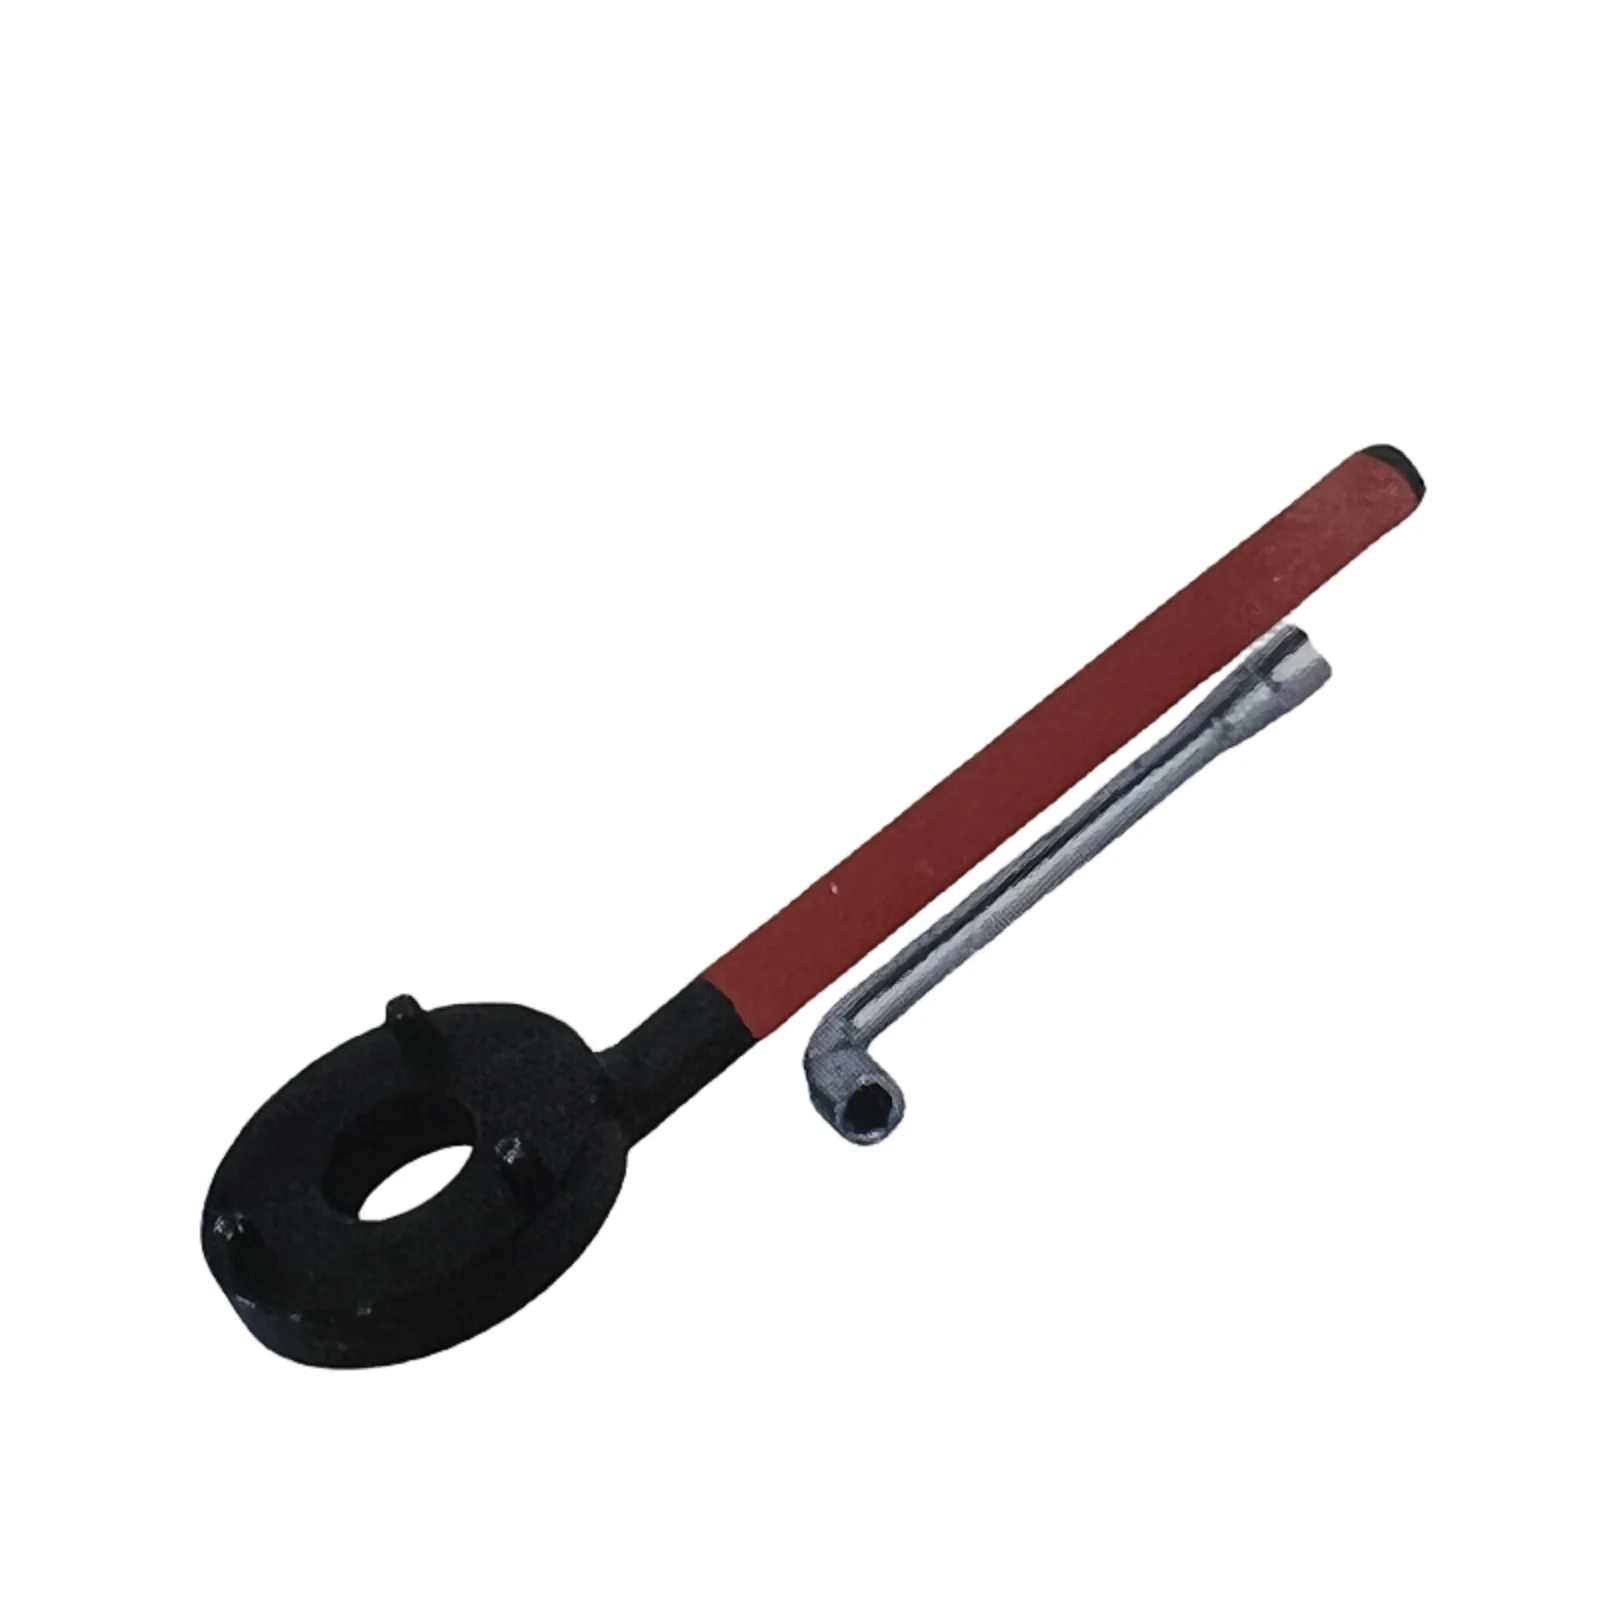 

RV65F car air conditioning maintenance tool, for Toyota Corolla external compressor clutch suction cup disassembly tool